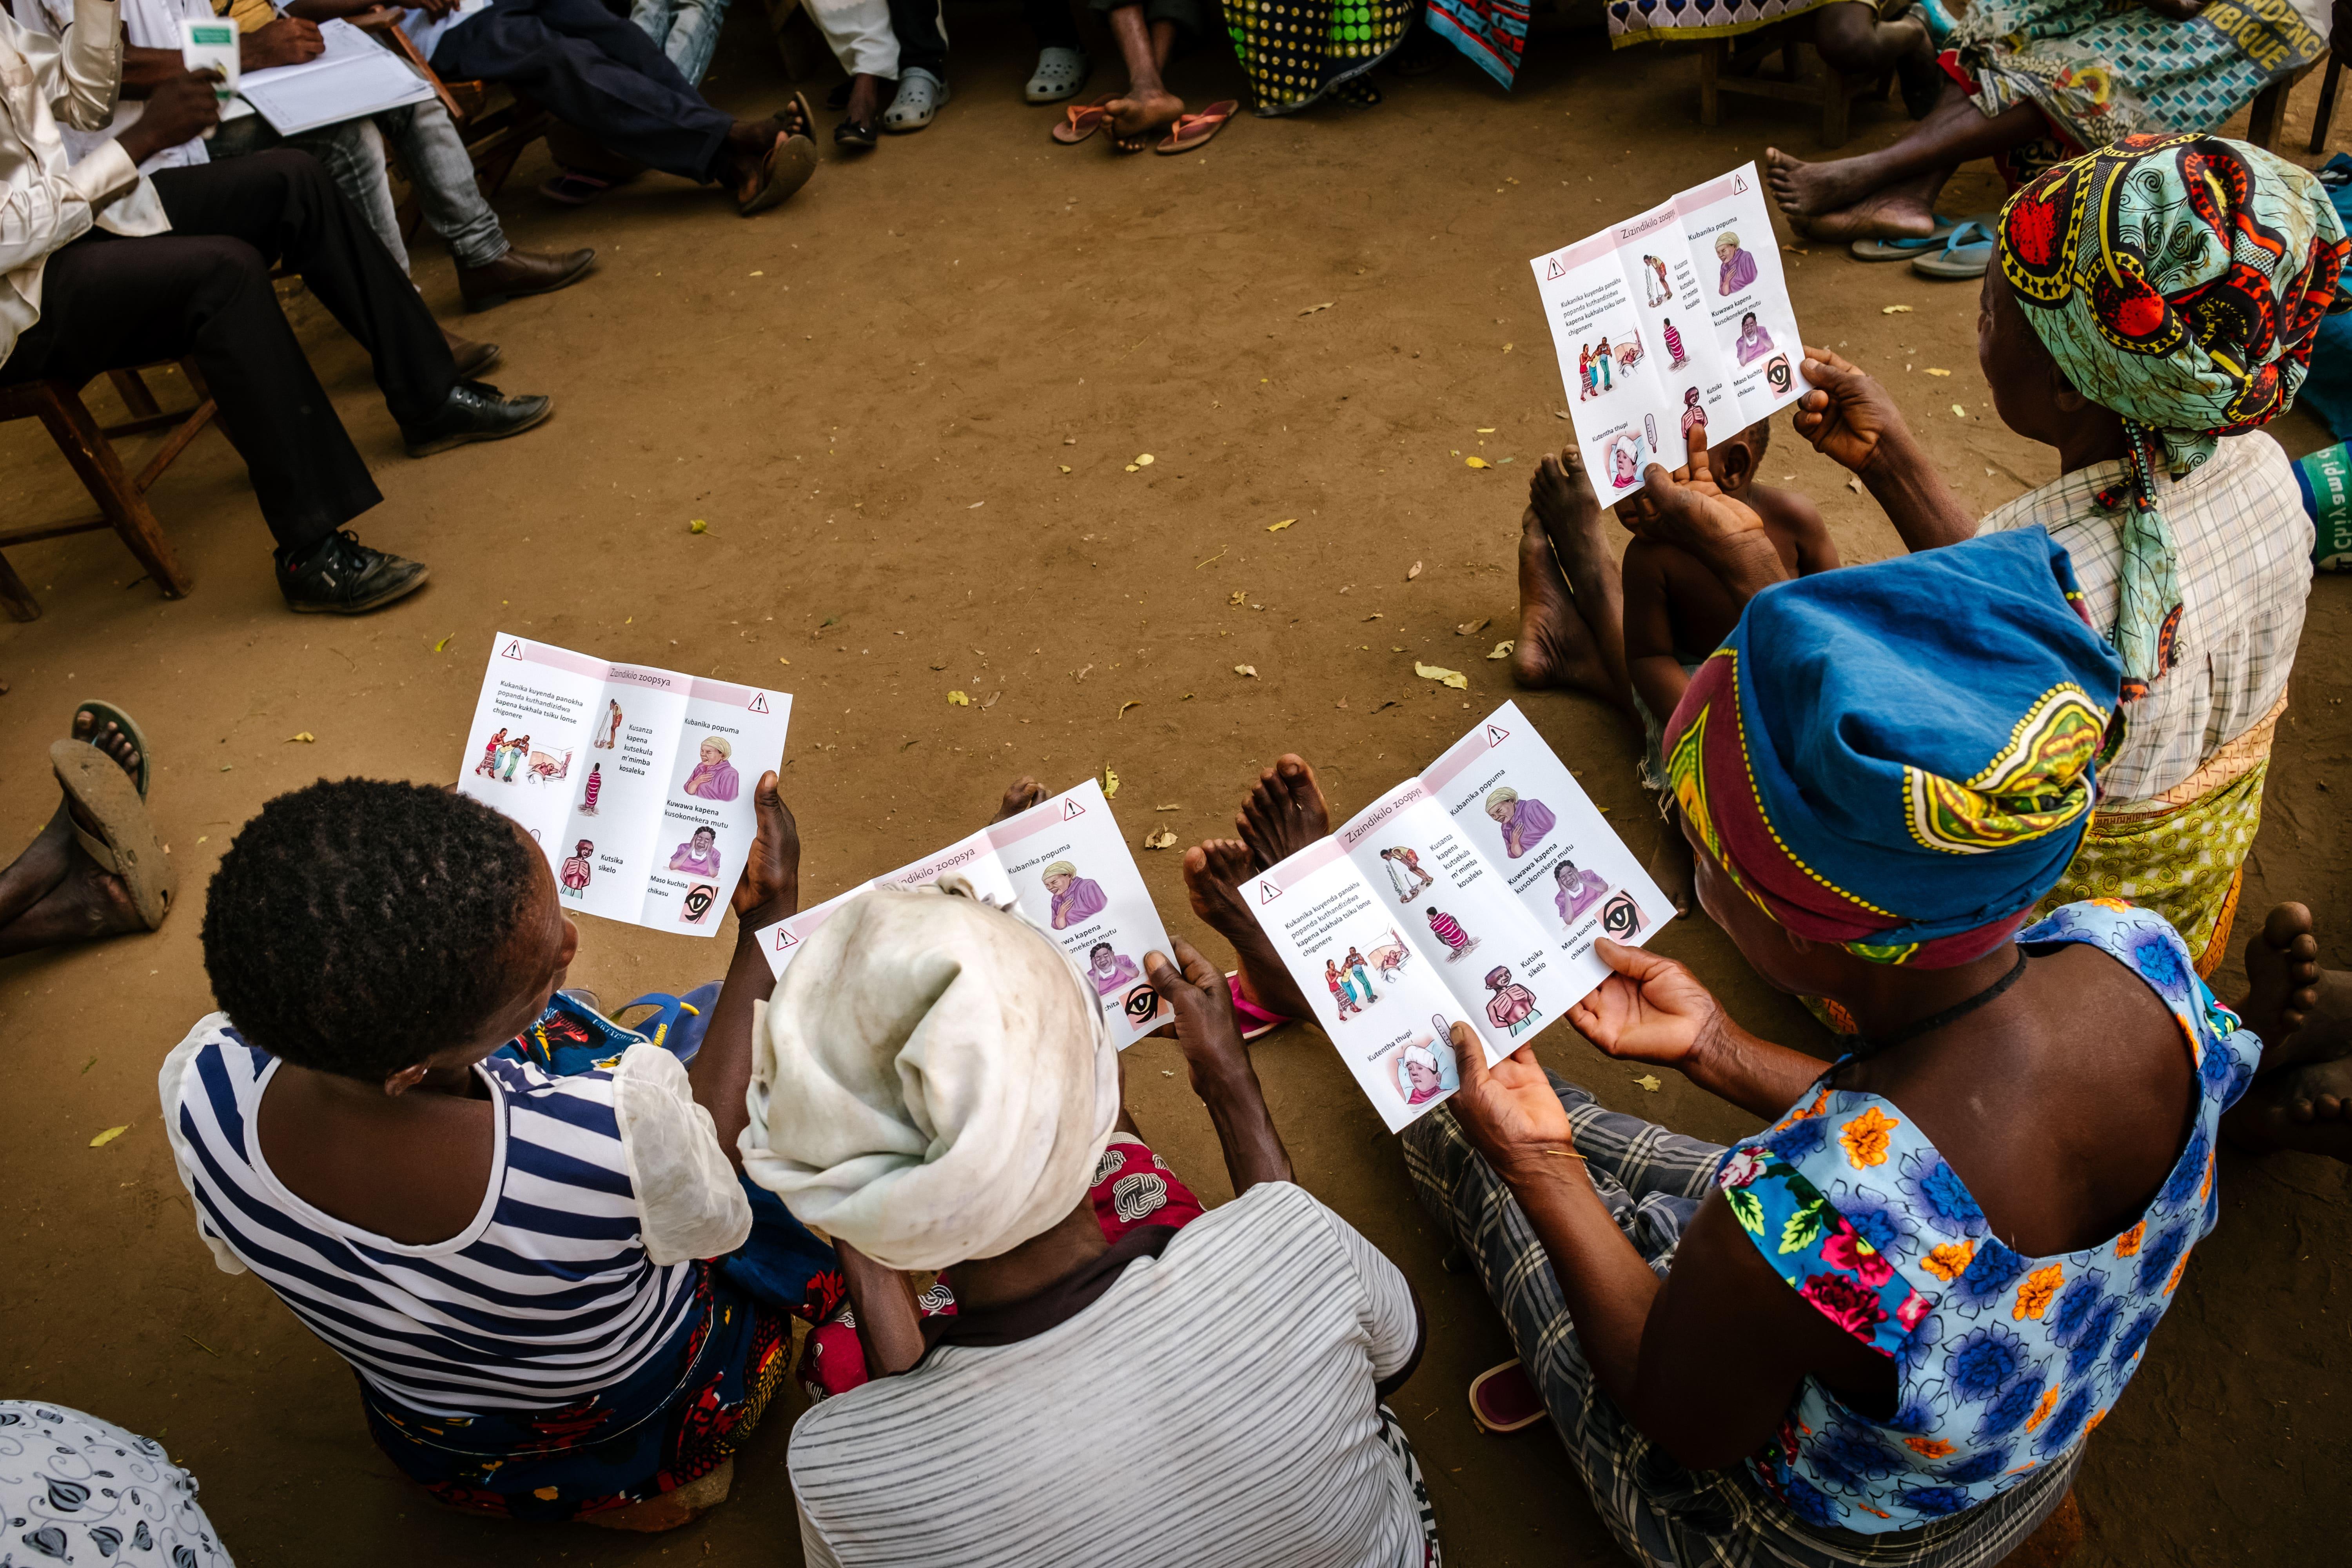 Members of the support group at Ndamera Health Centre in Nsanje district going through some educational brochures provided by MSF health promoters for advanced HIV